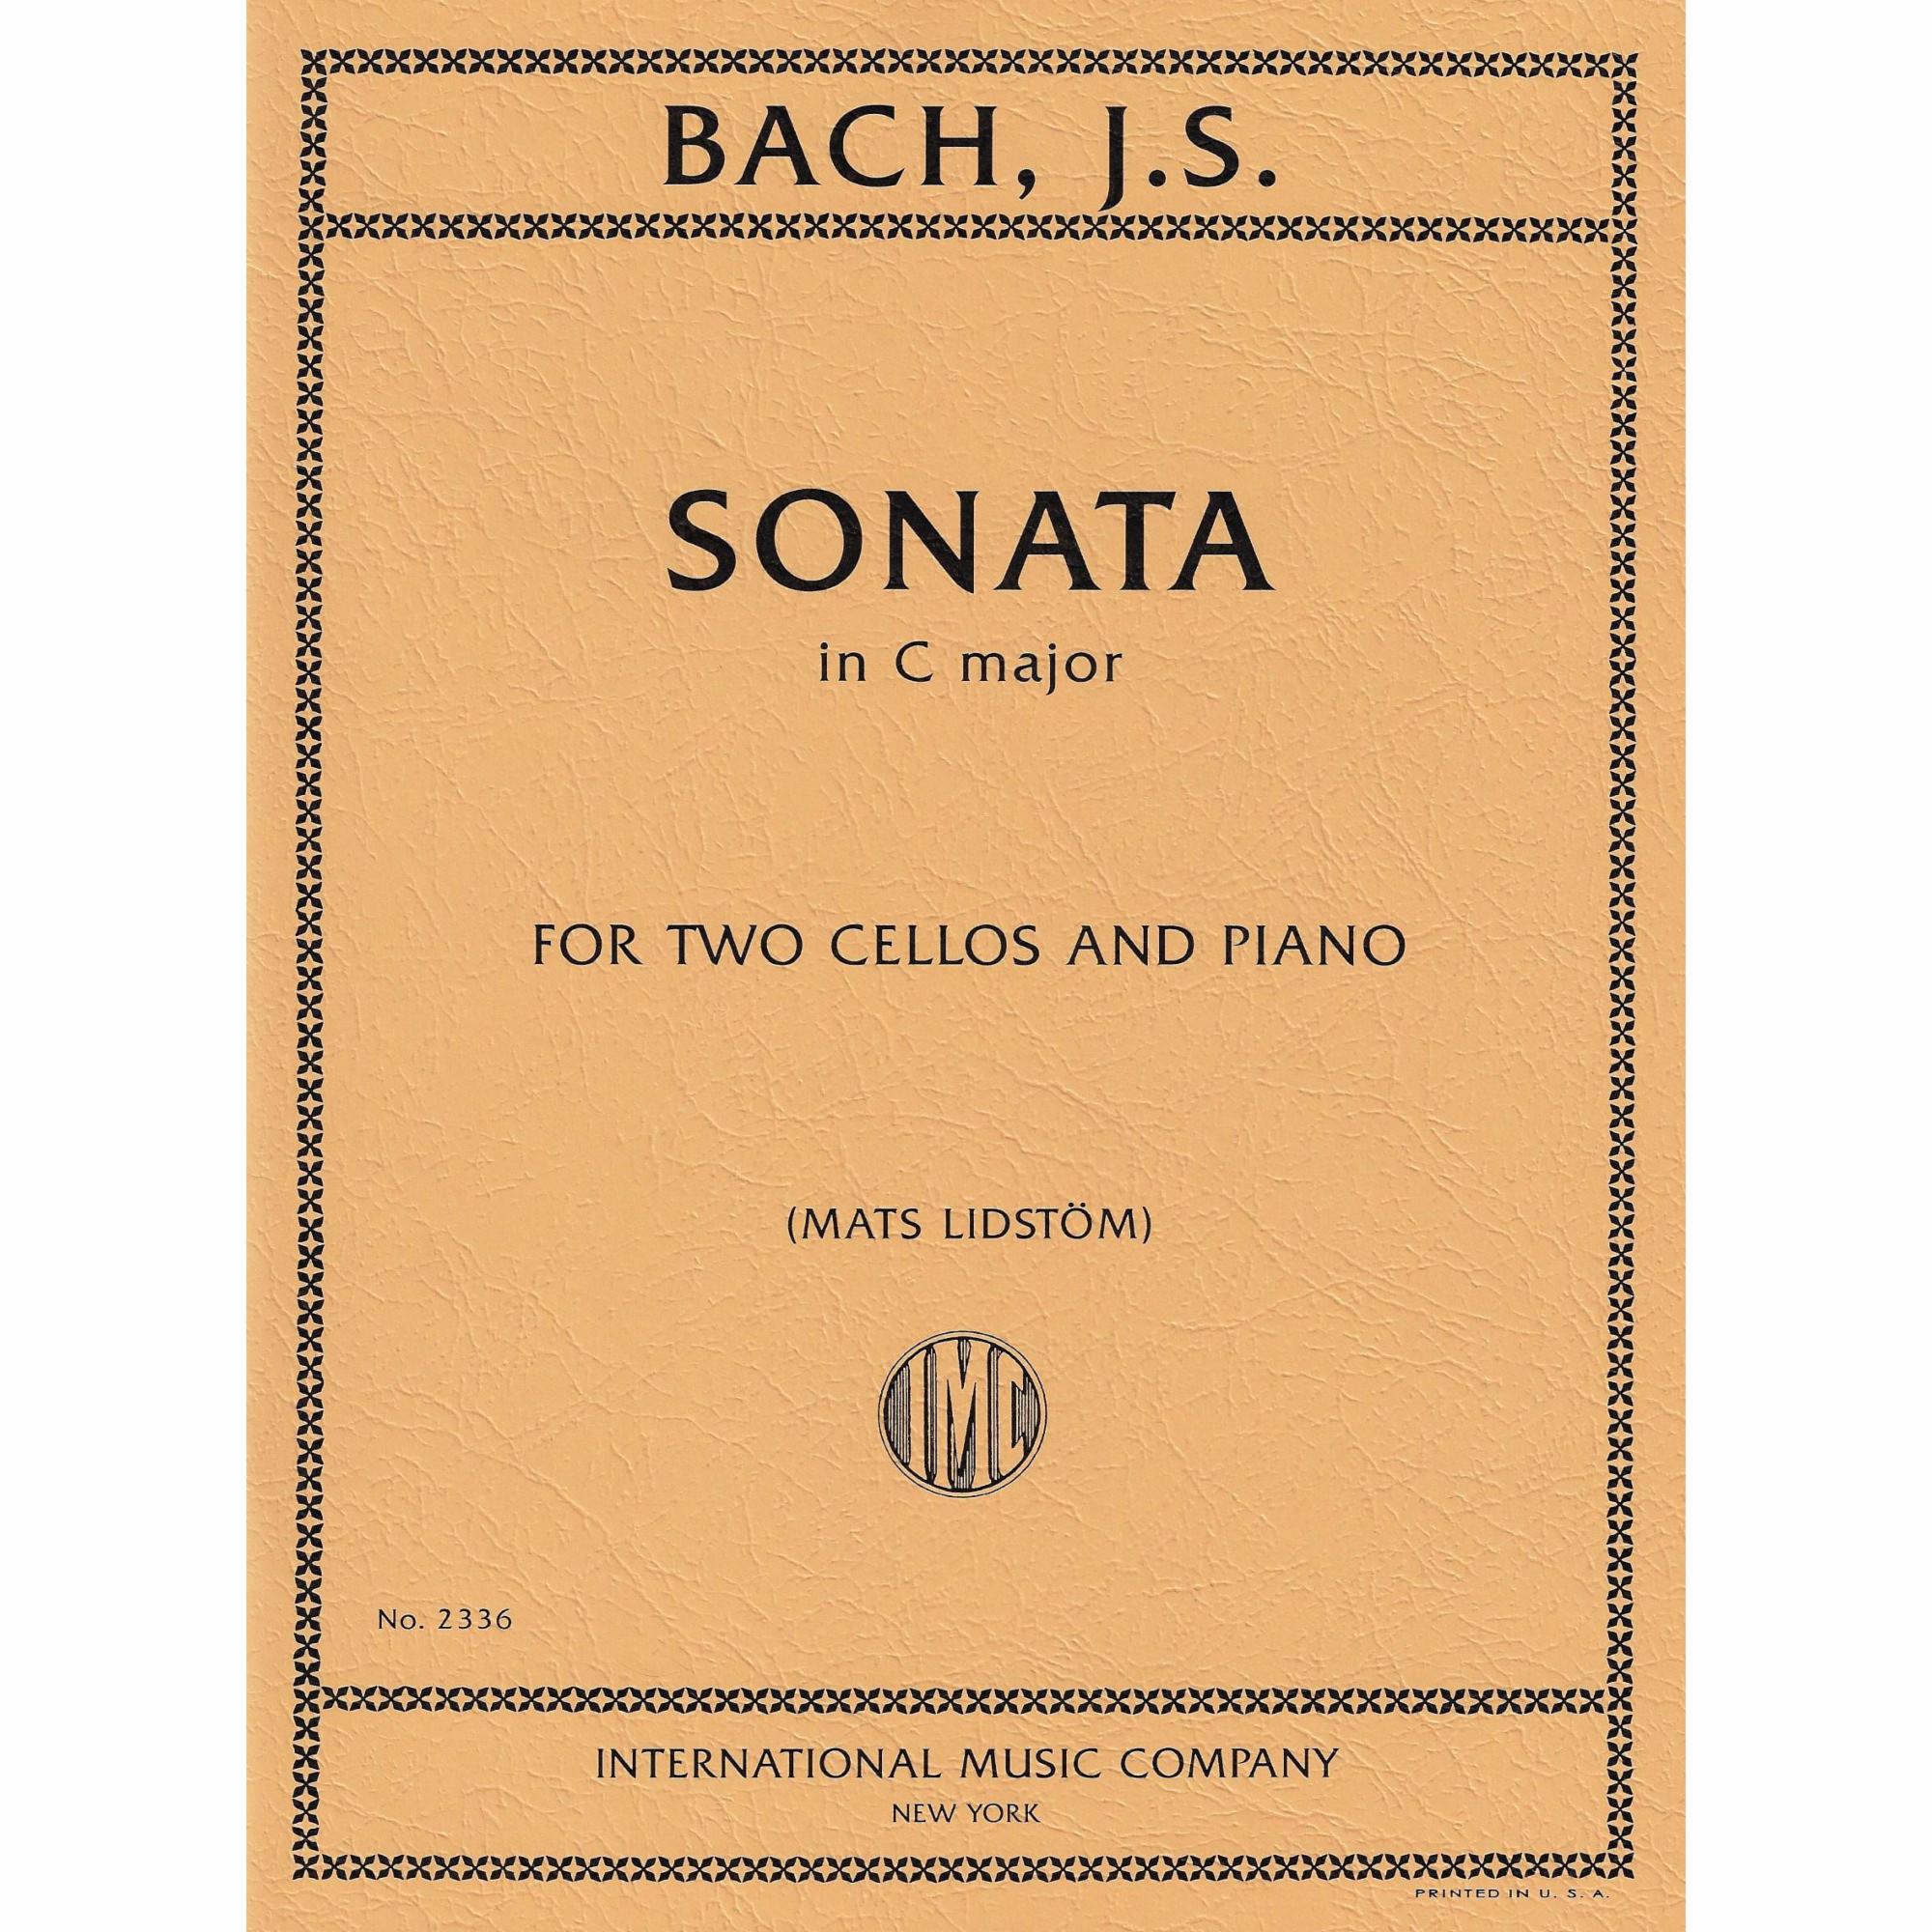 Bach -- Sonata in C Major, BWV 1037 for Two Cellos and Piano